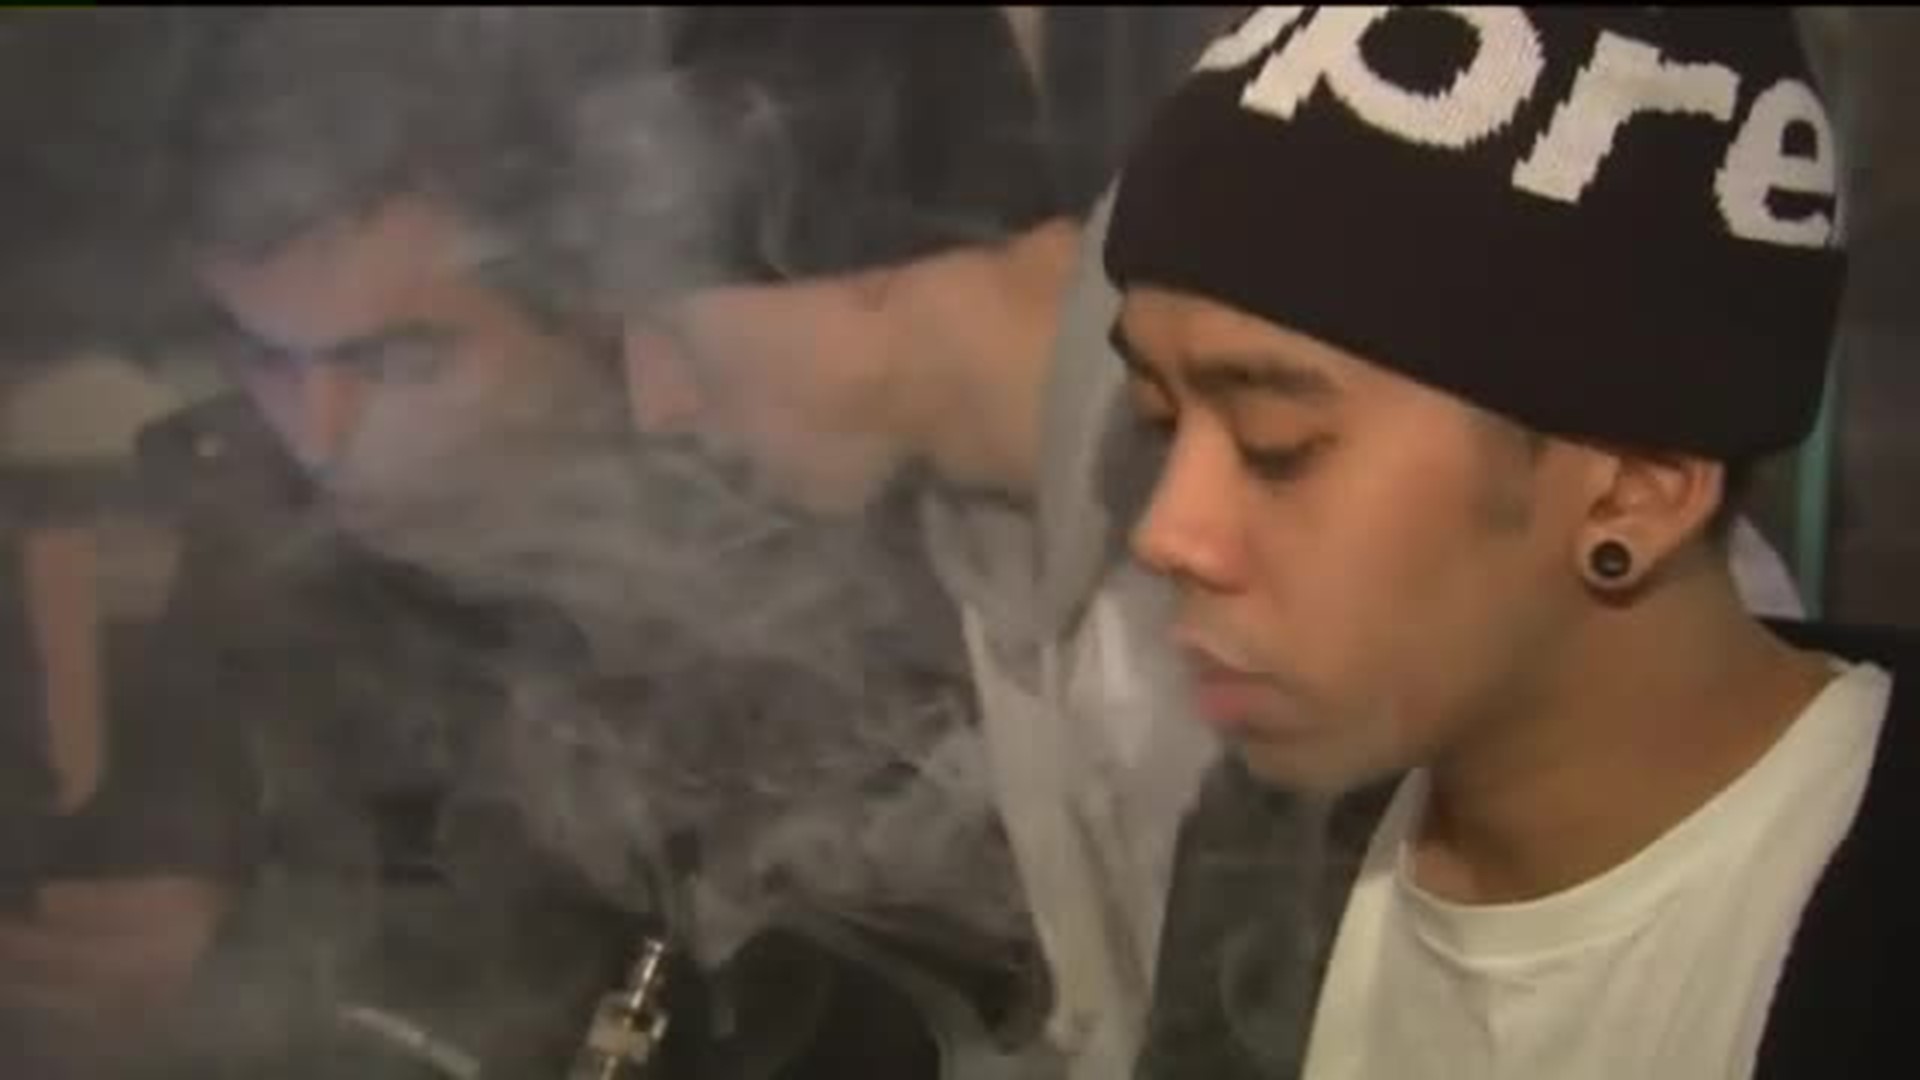 Safety of Vaping, Possible Ban Worry Smoke Shop Owners